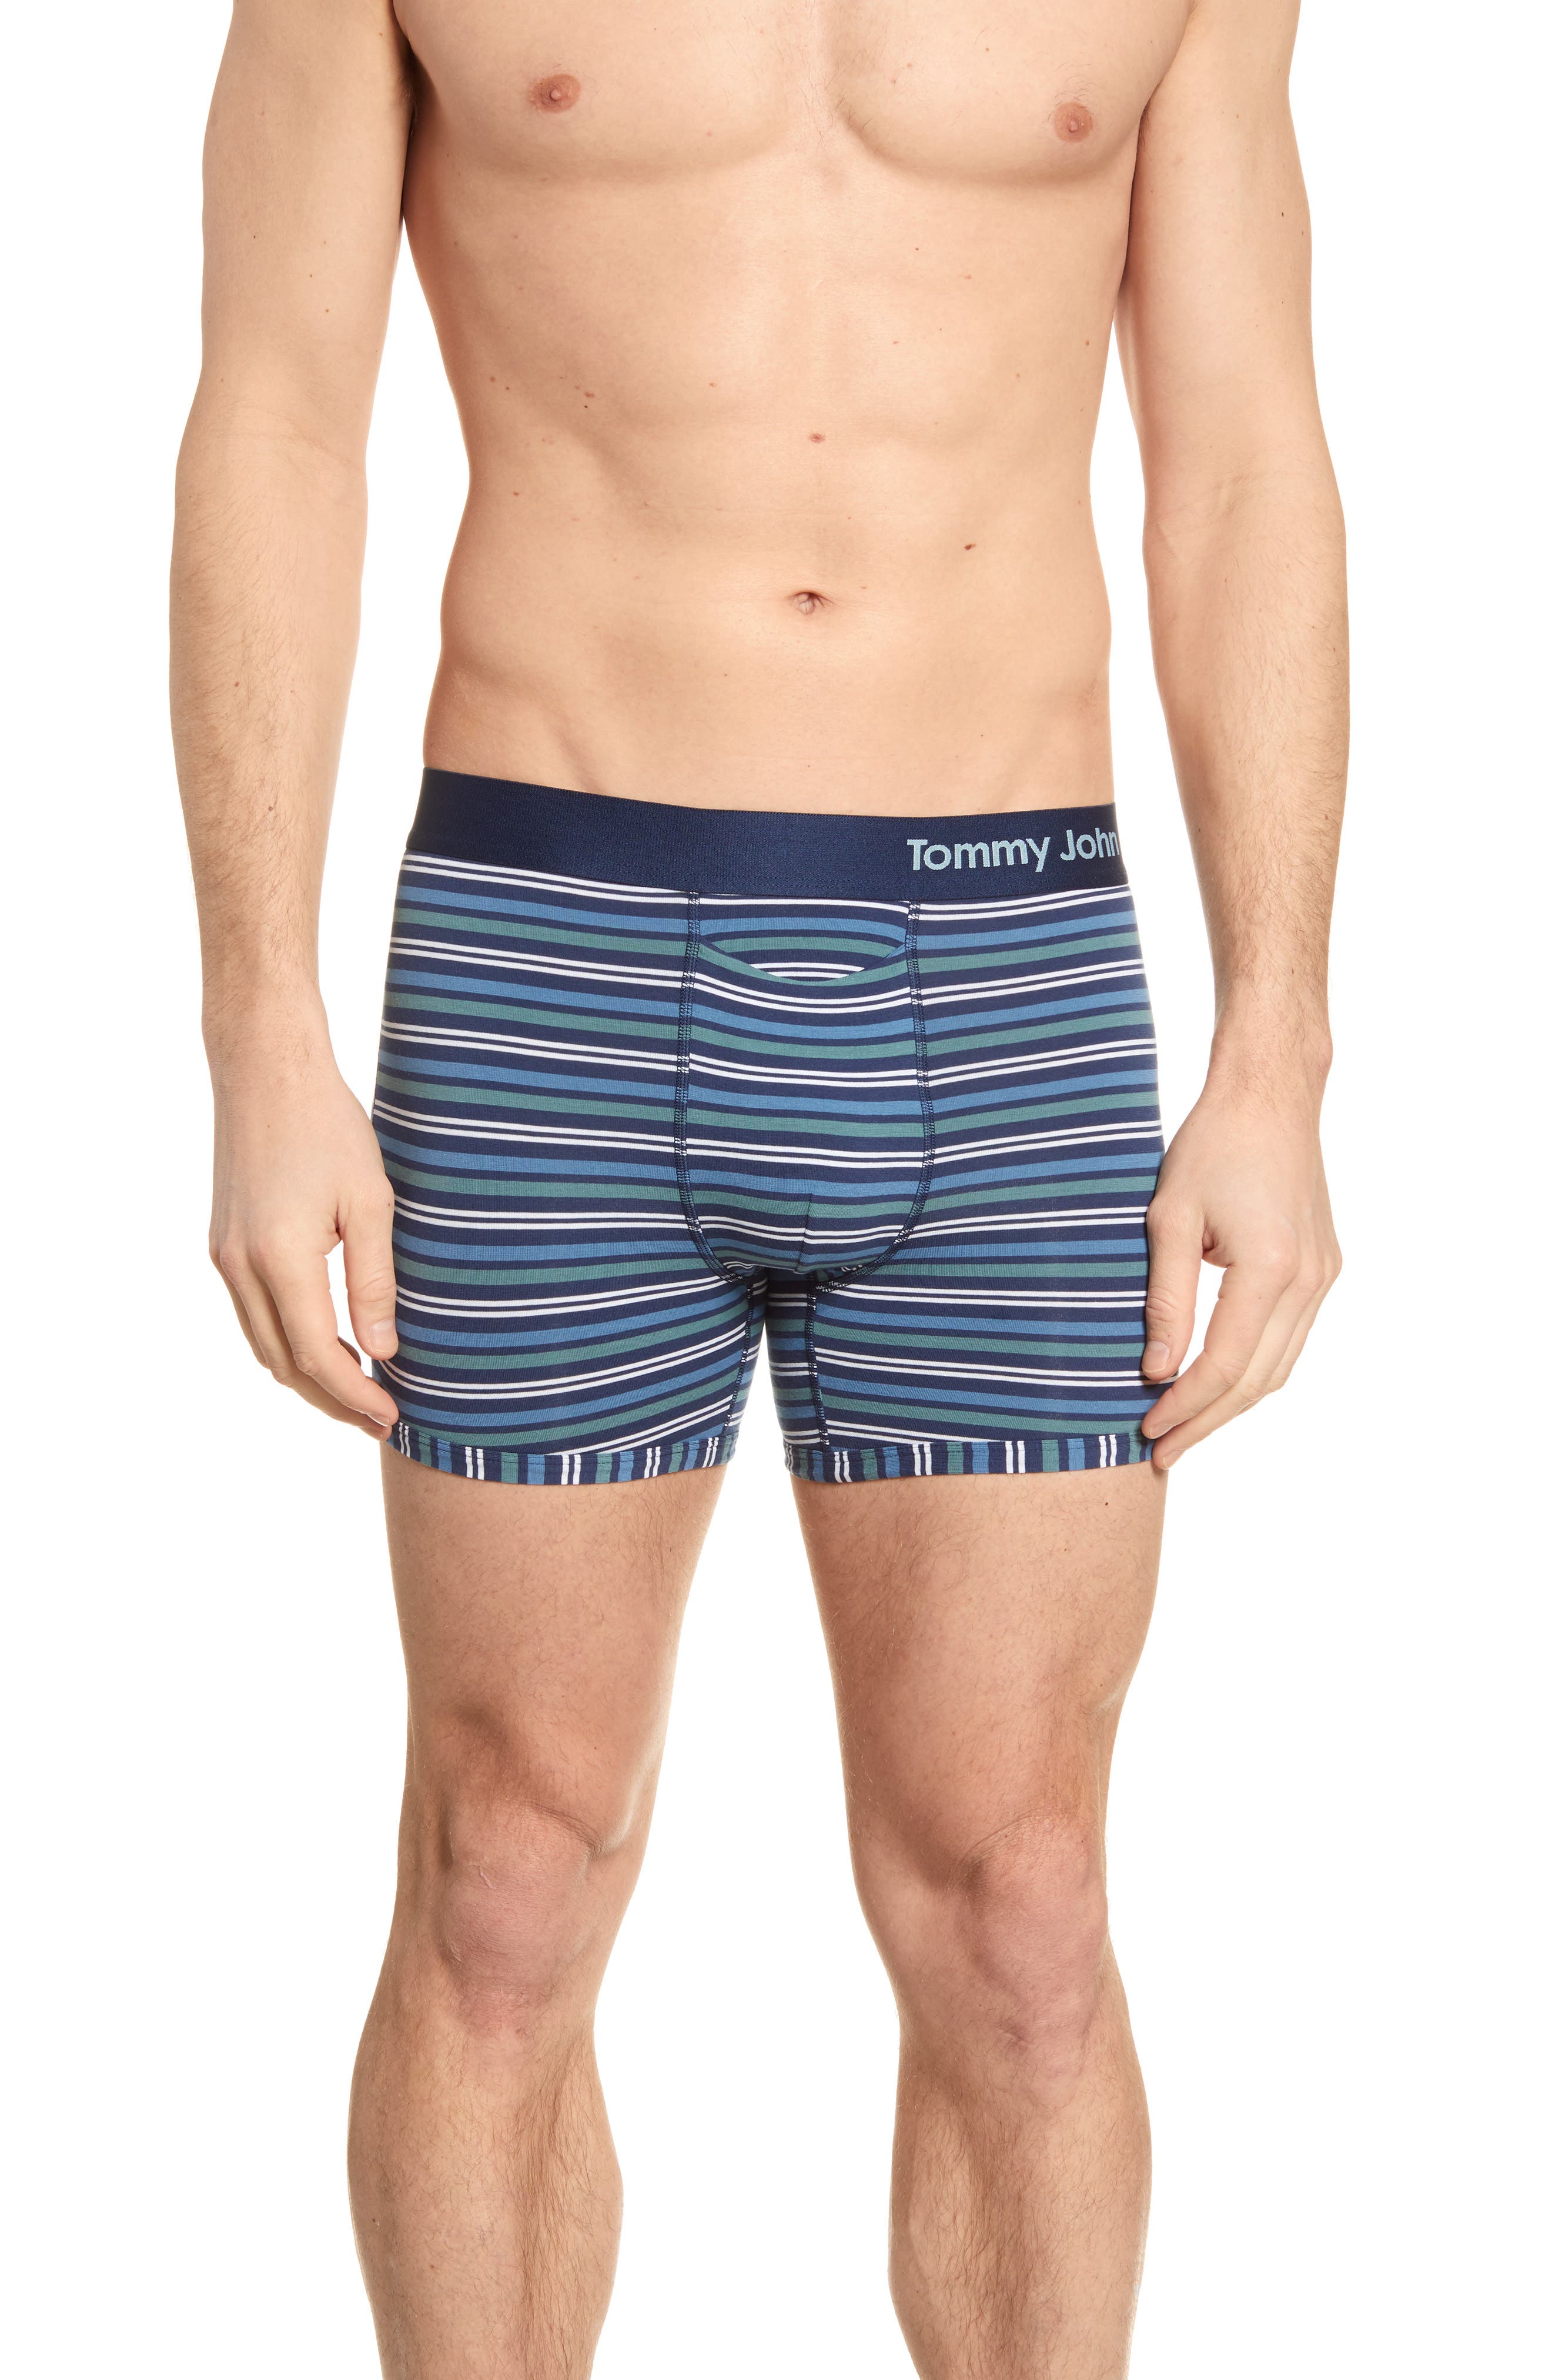 tommy john cool cotton trunk